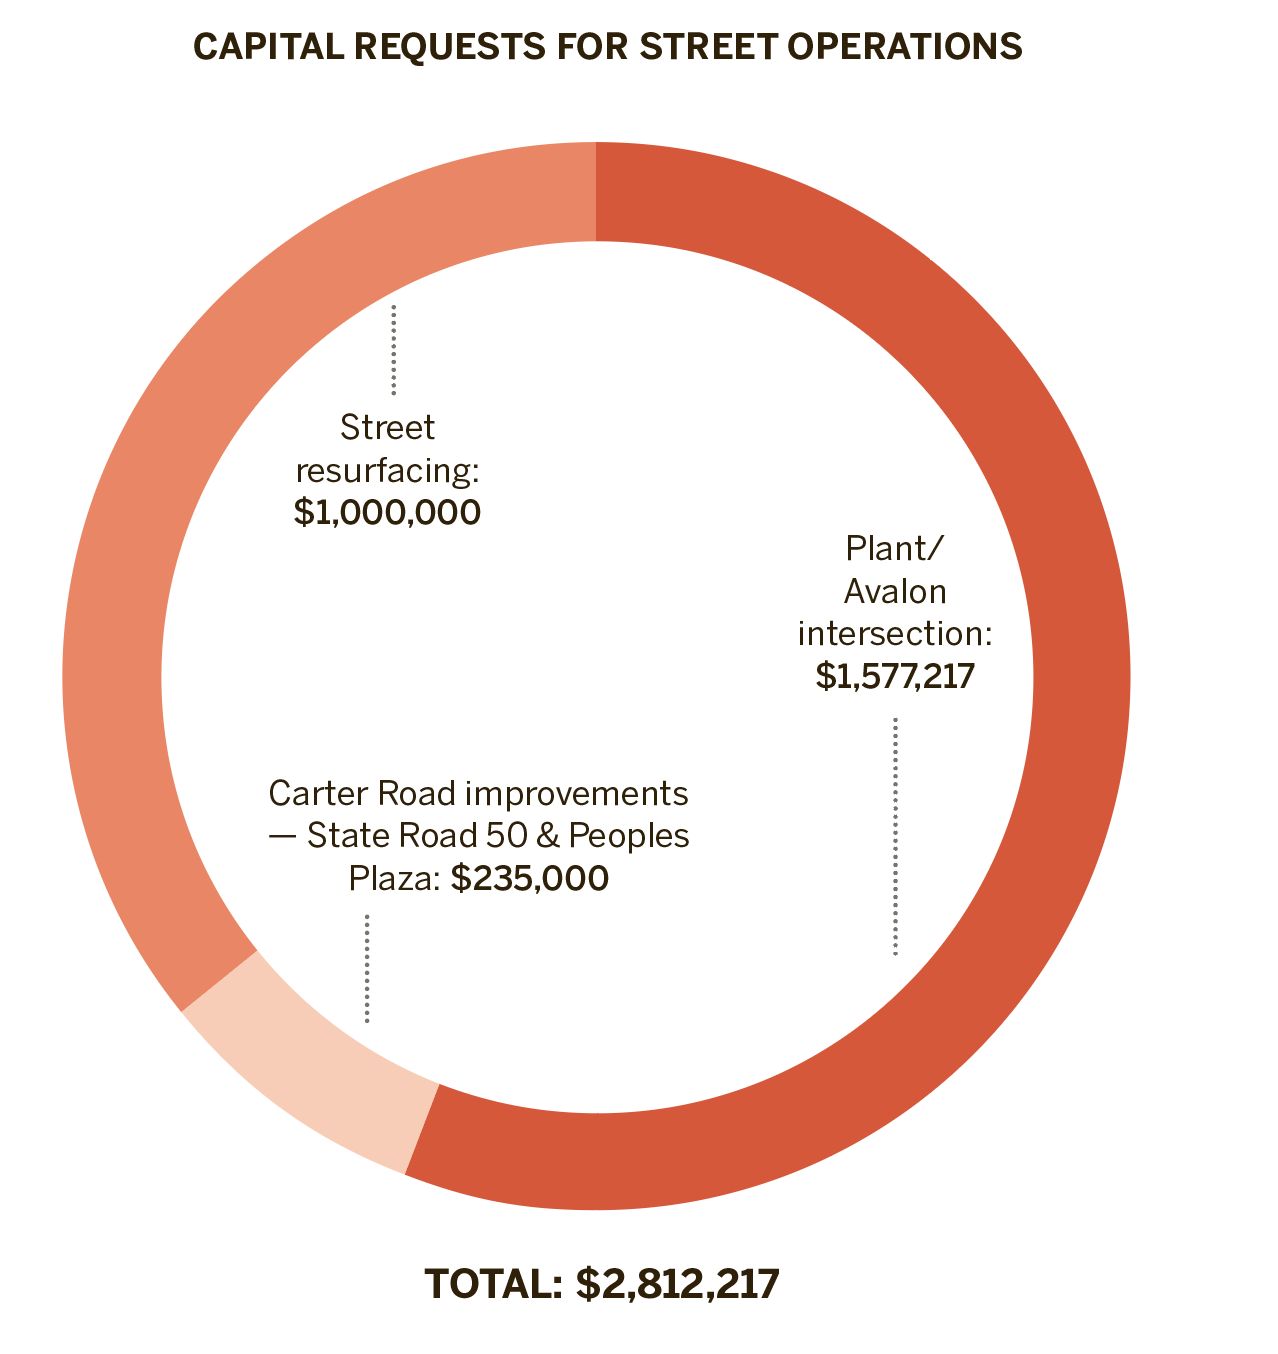 Fiscal Year 2020-21's capital requests for Winter Garden street operations.